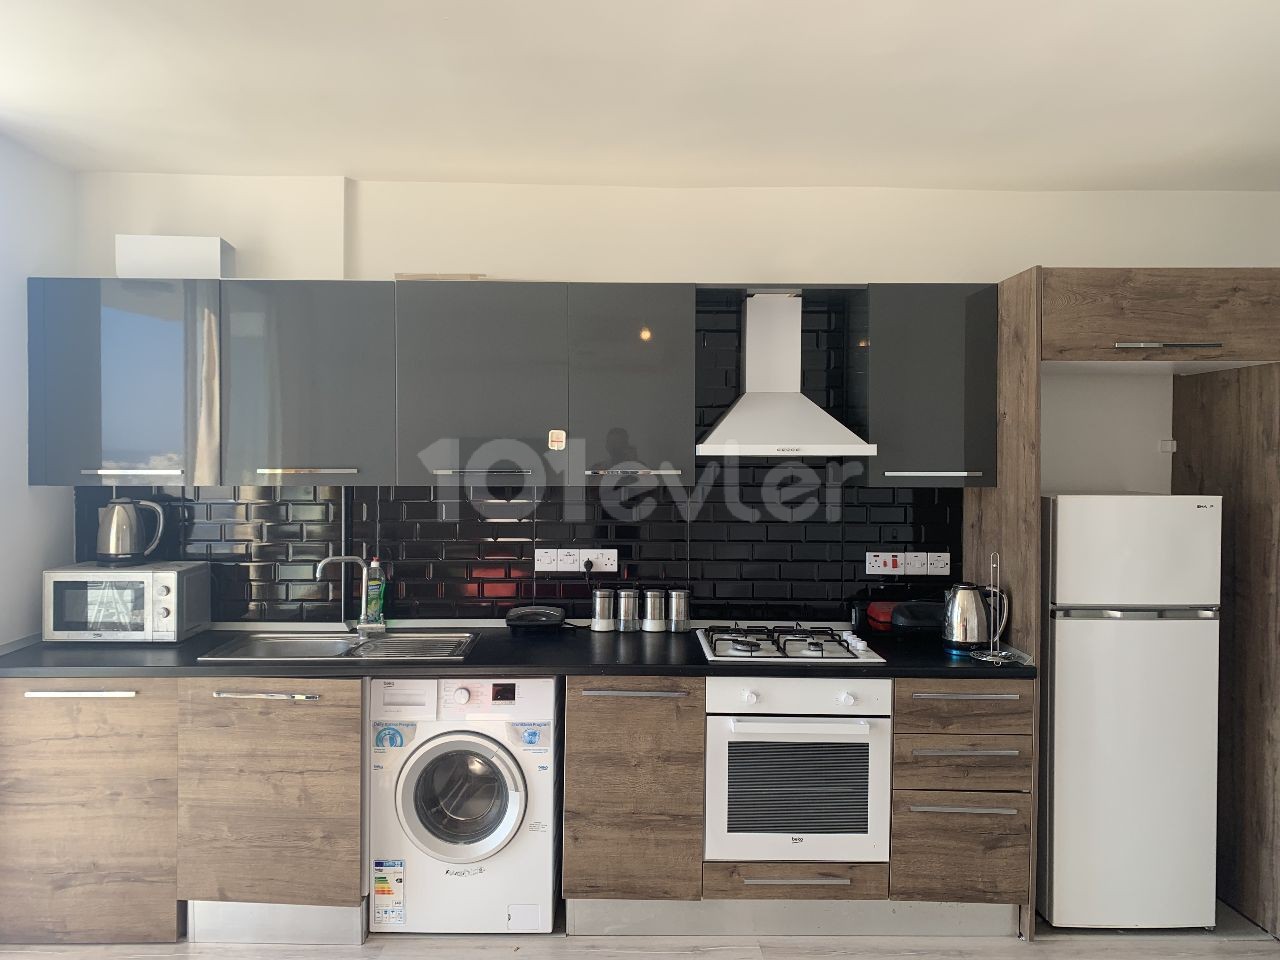 Loan Suitable for Sale Furnished Studio Flat with Sea View, Uptown Residence